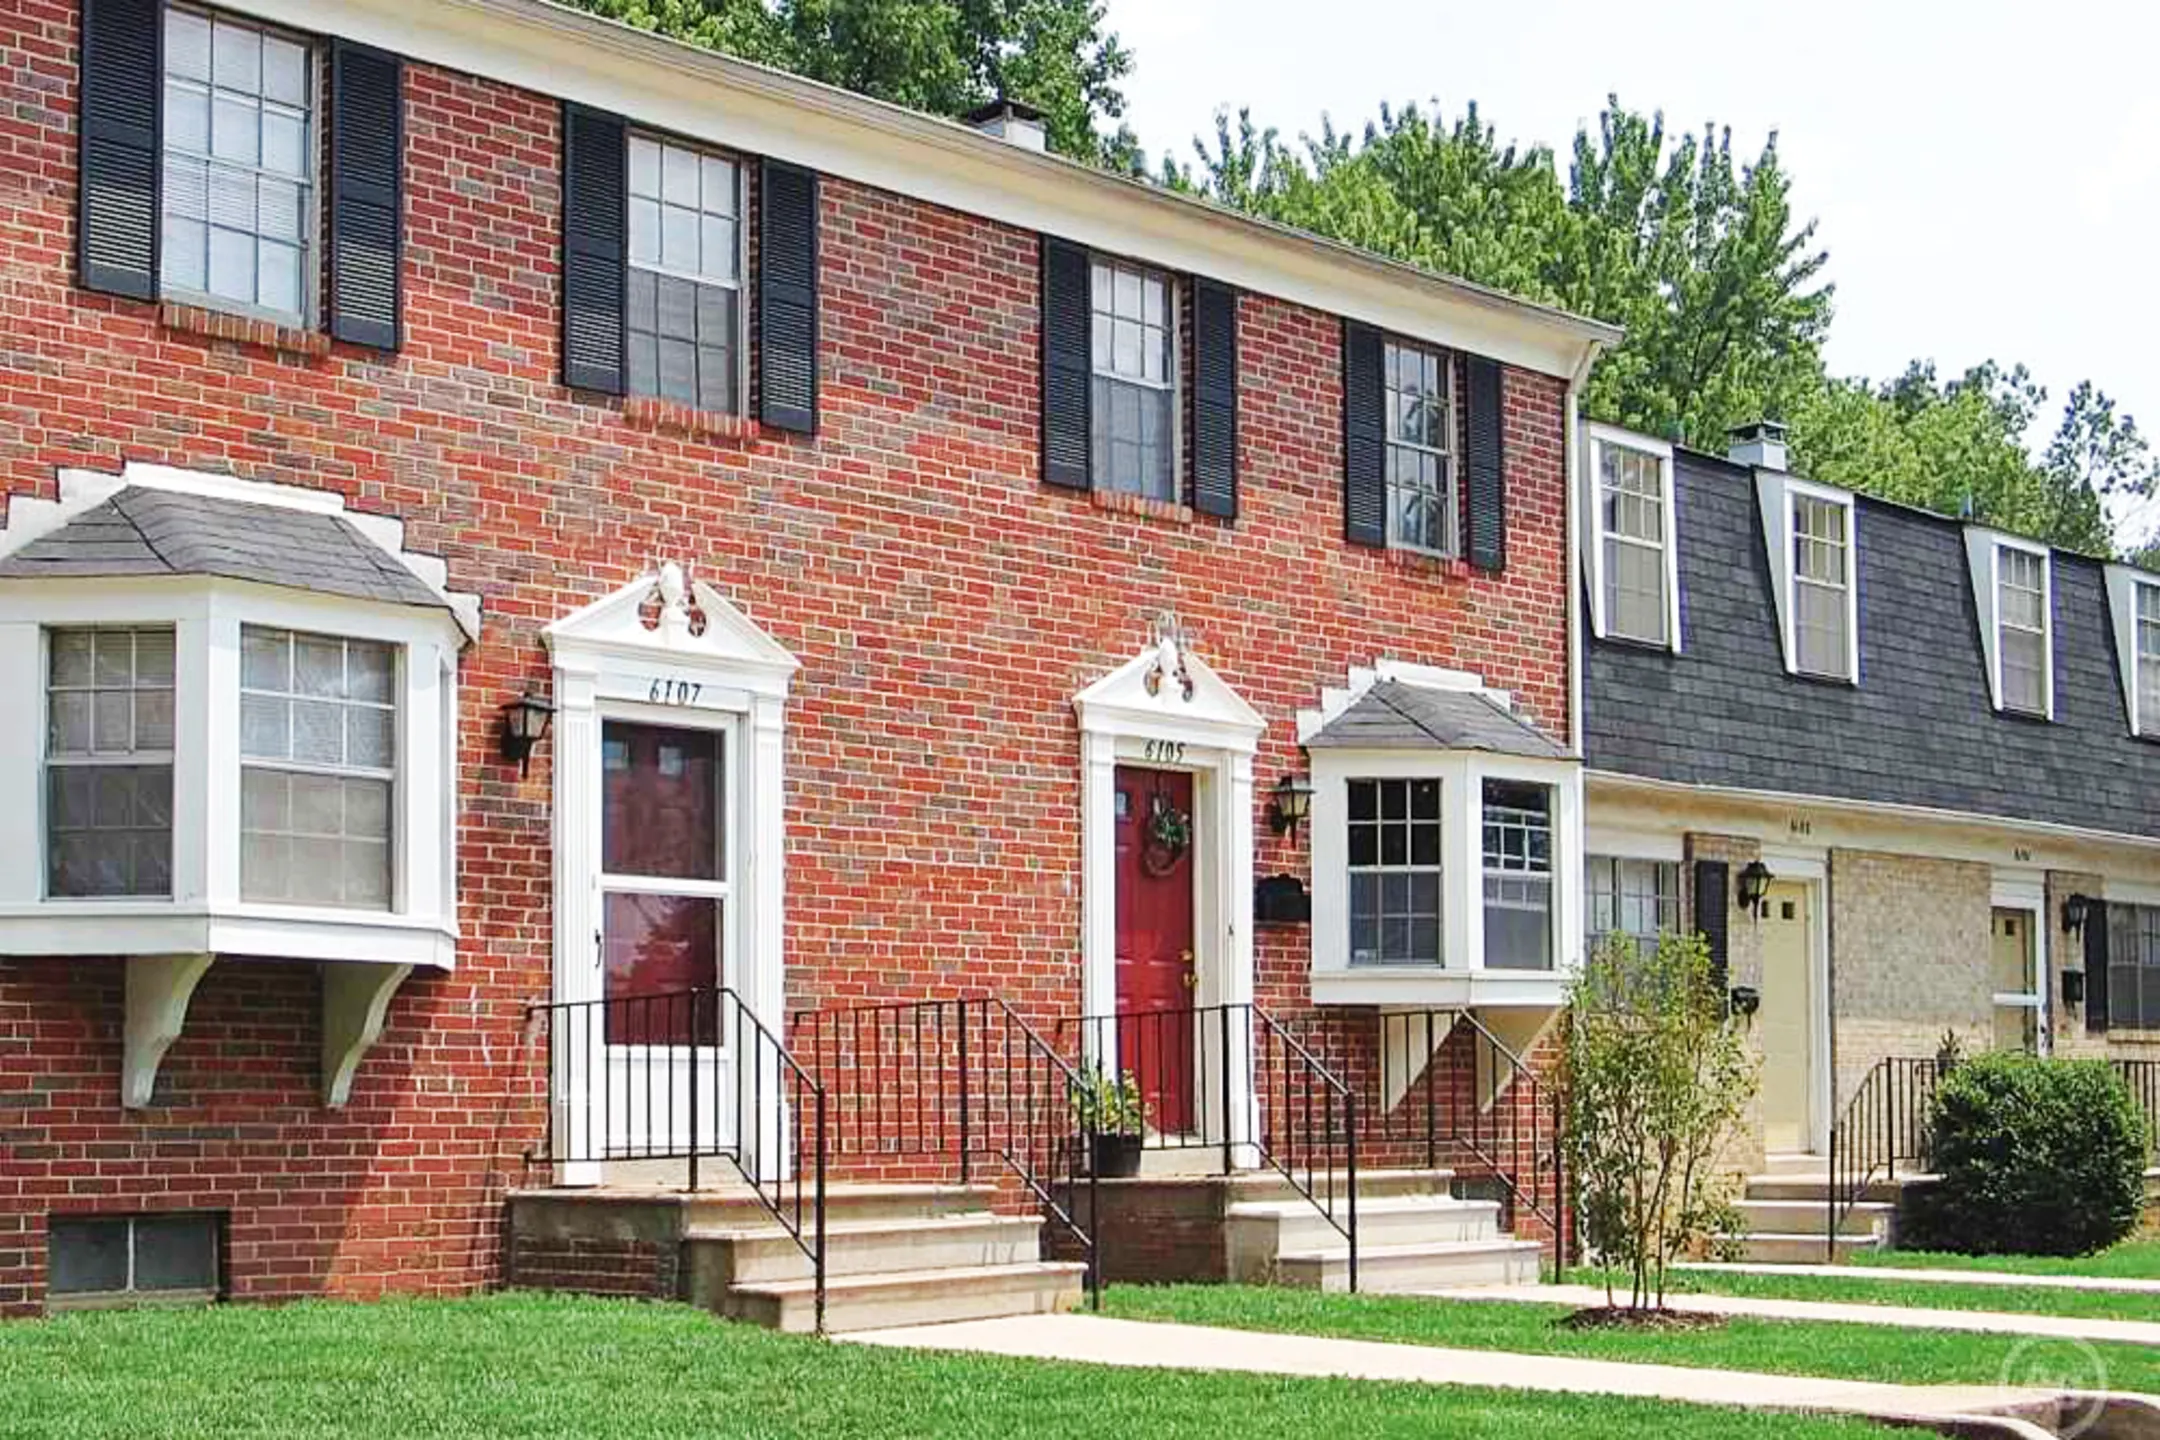 Building - Gardenvillage Apartments & Townhouses - Baltimore, MD